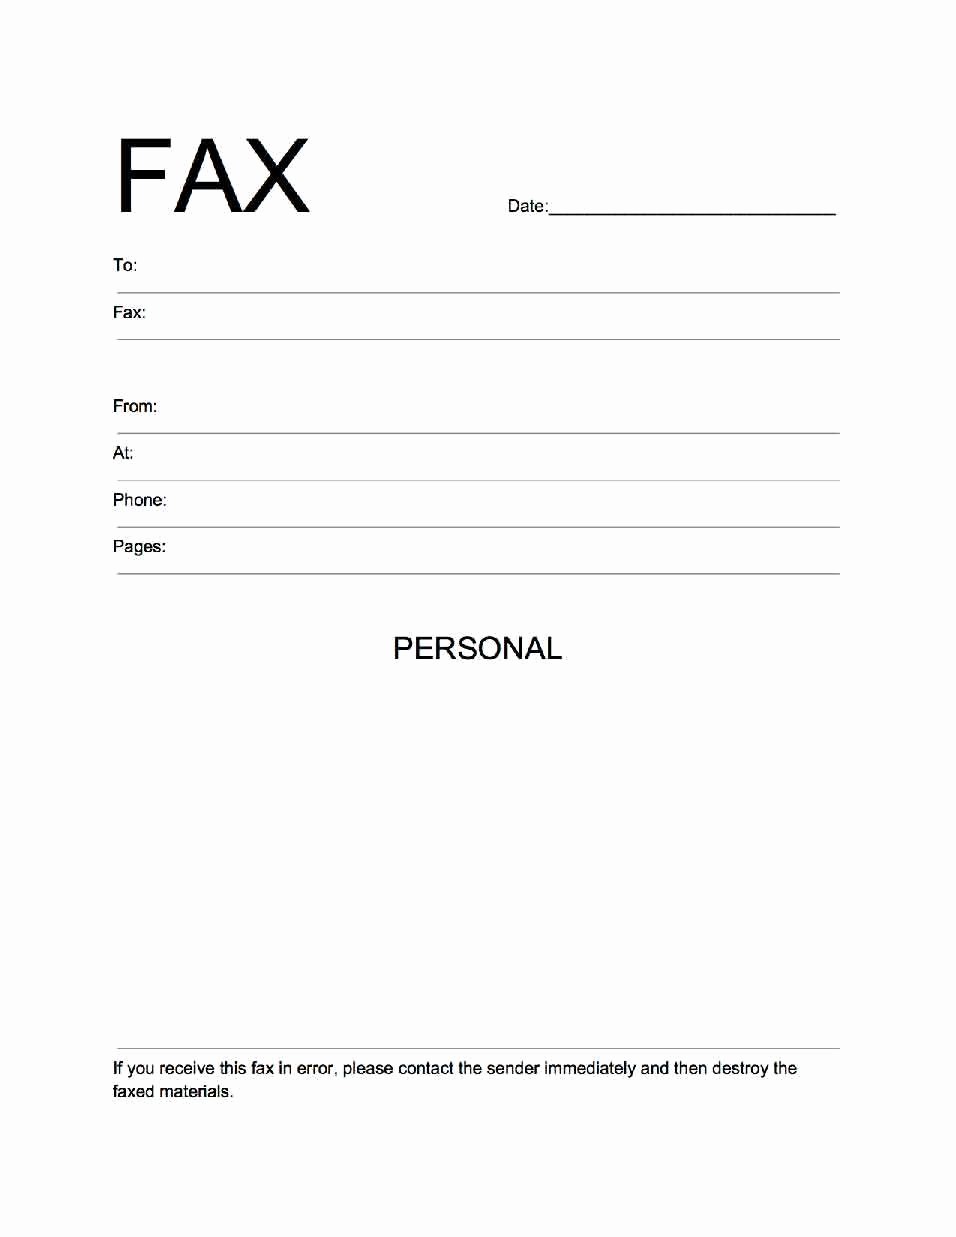 Personal Fax Cover Sheet Pdf Lovely Fax Cover Sheet Pdf Excel &amp; Word